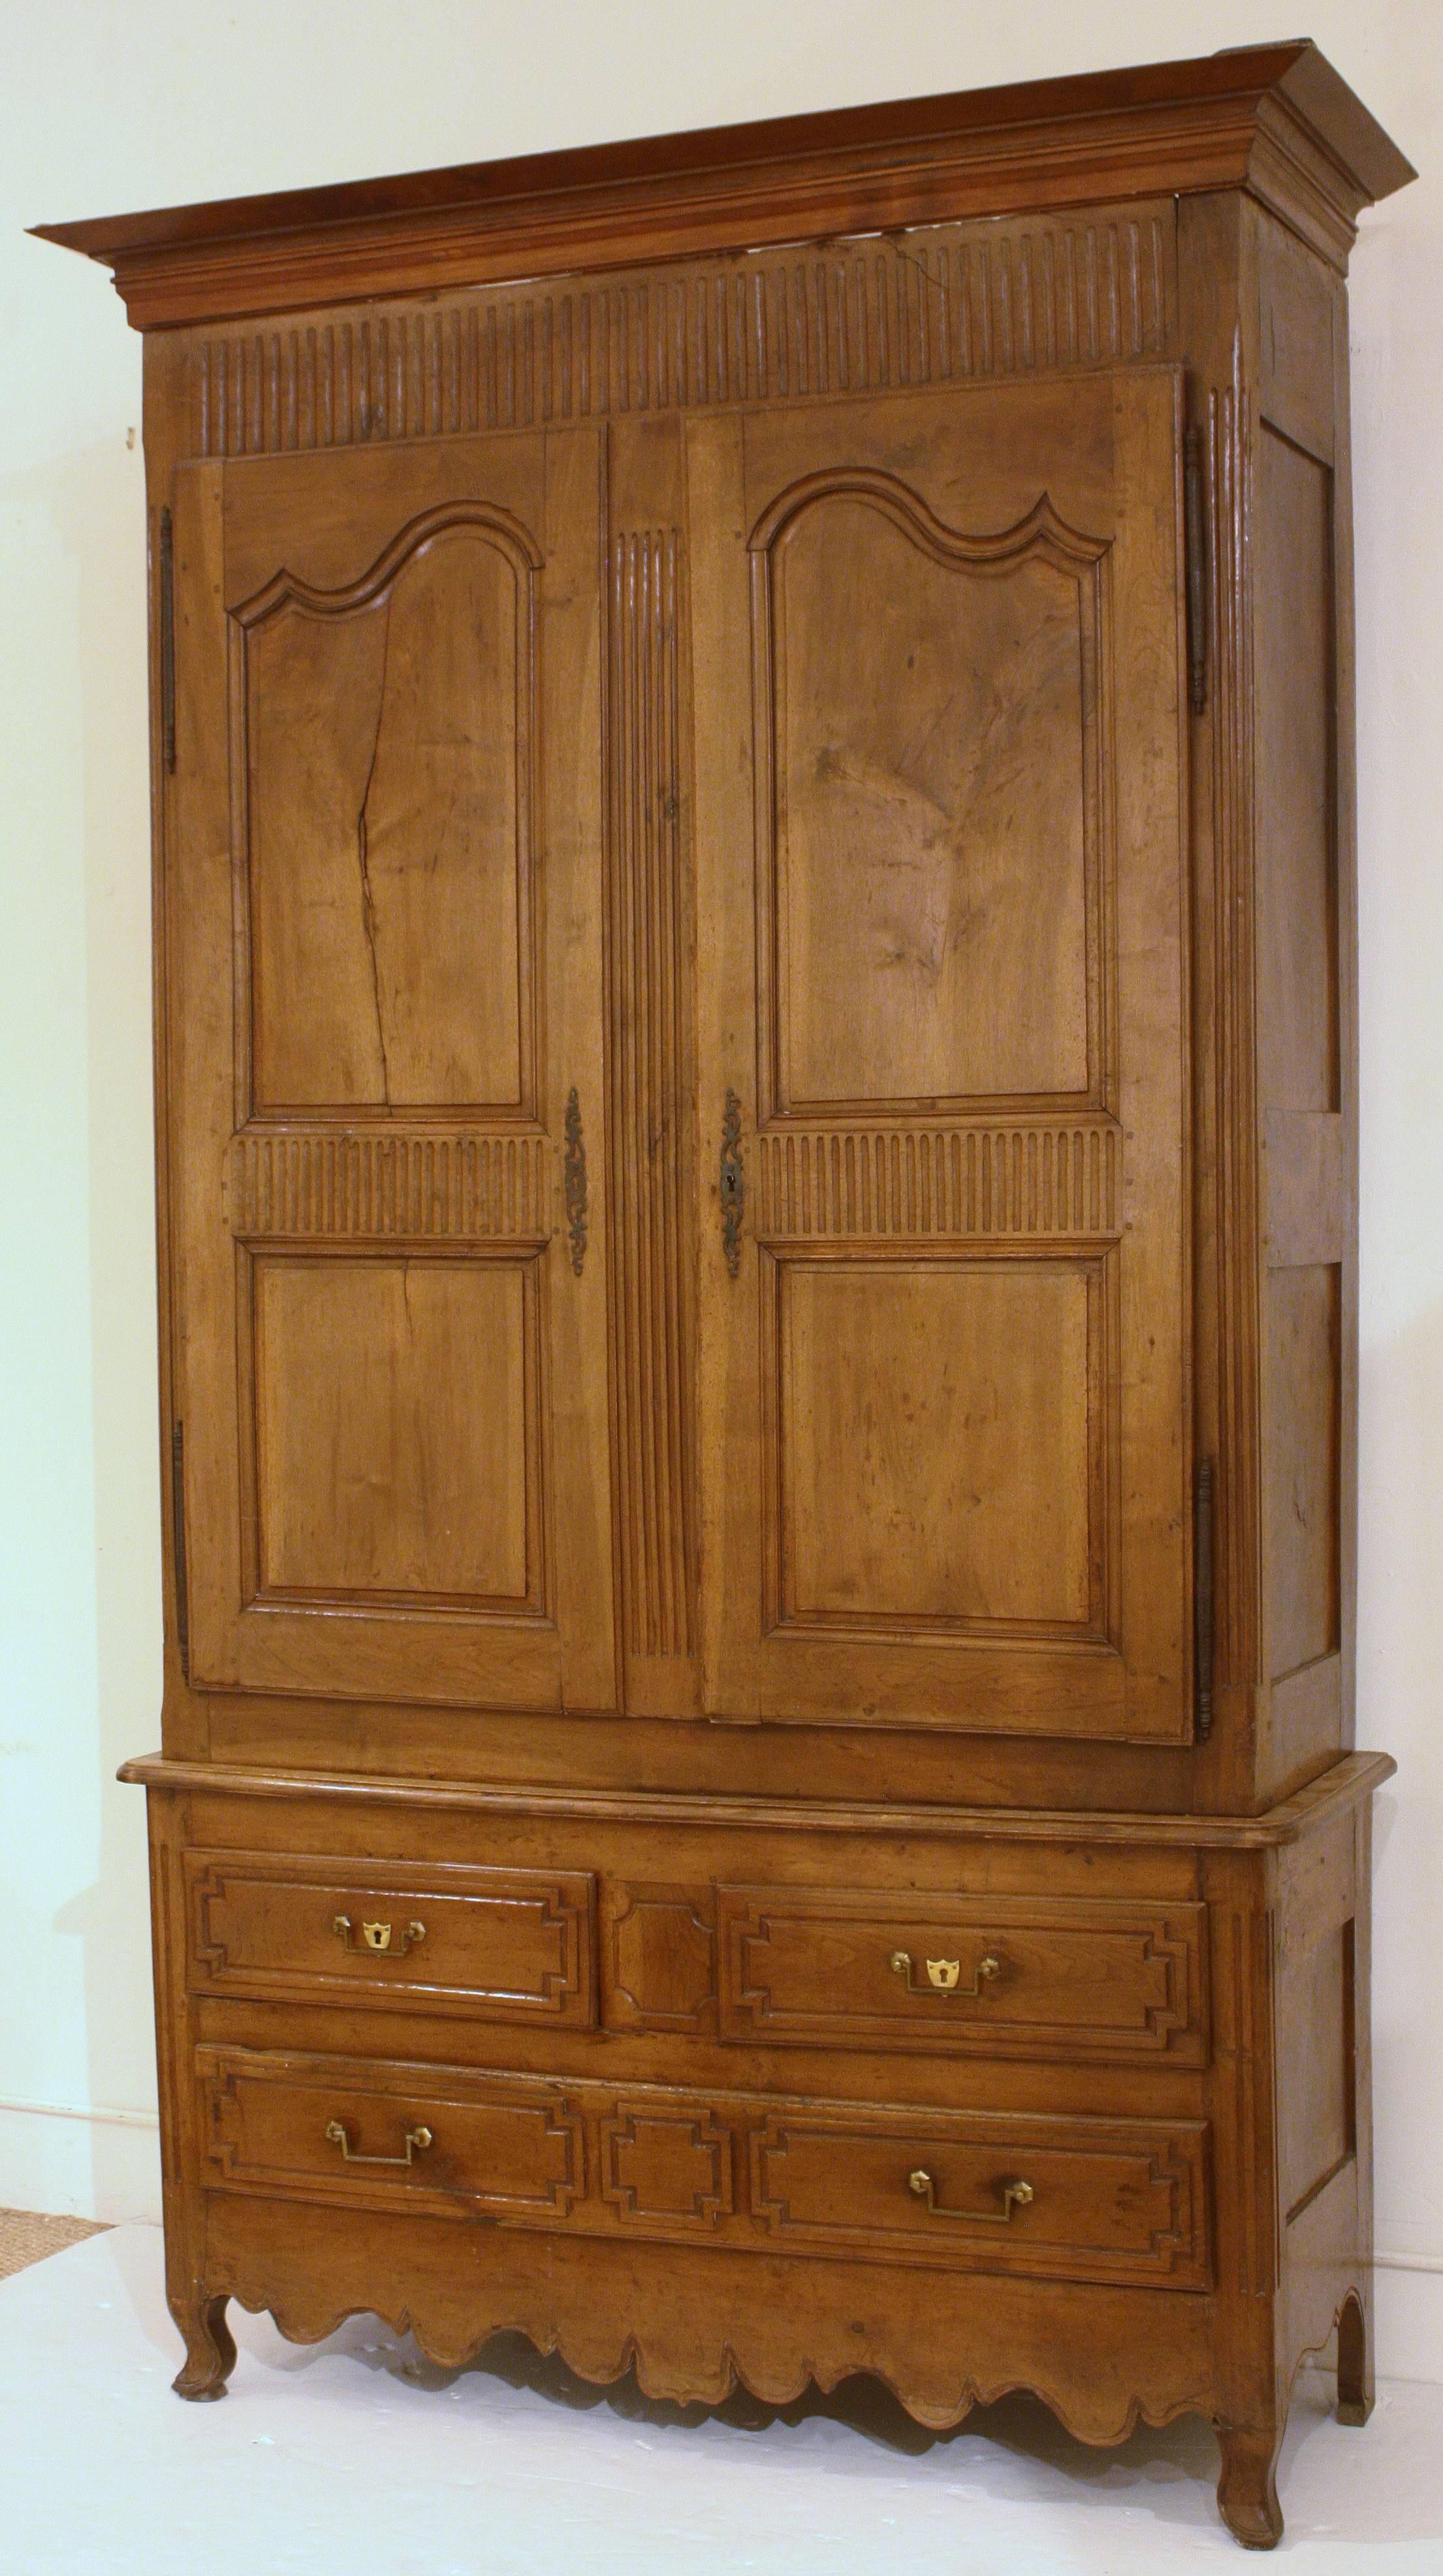 Beautifully carved Provencial Louis XV walnut armoire with elegant grooves in the cornice, center stile and also central to the upper door panels. Three (3) drawers in the base have a distinctive Directoire design. A great storage piece for a